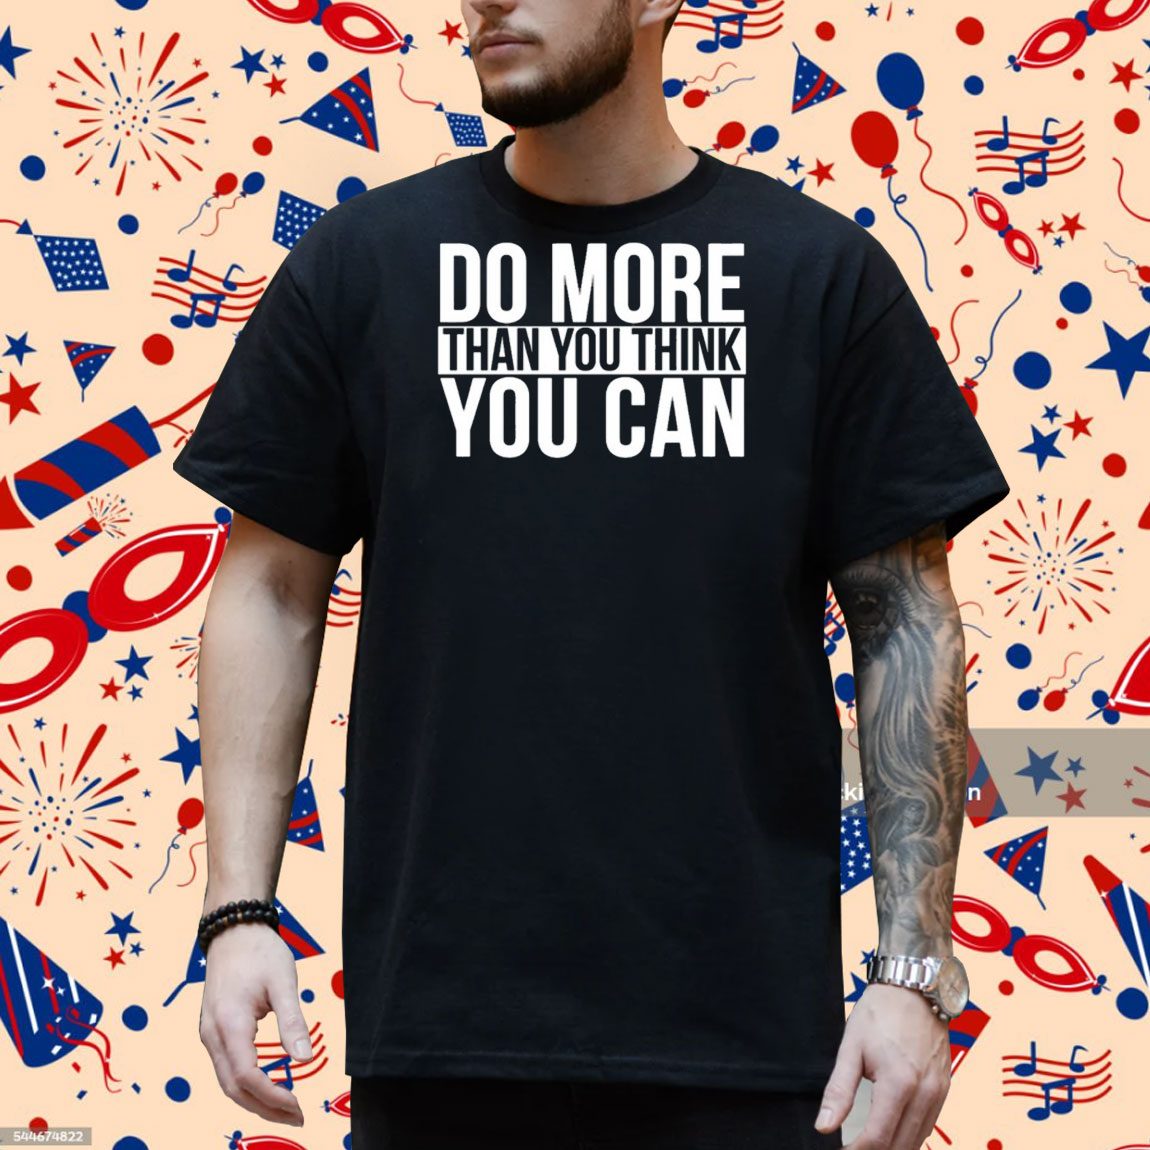 Awakenwithjp Do More Than You Think You Can T-Shirt